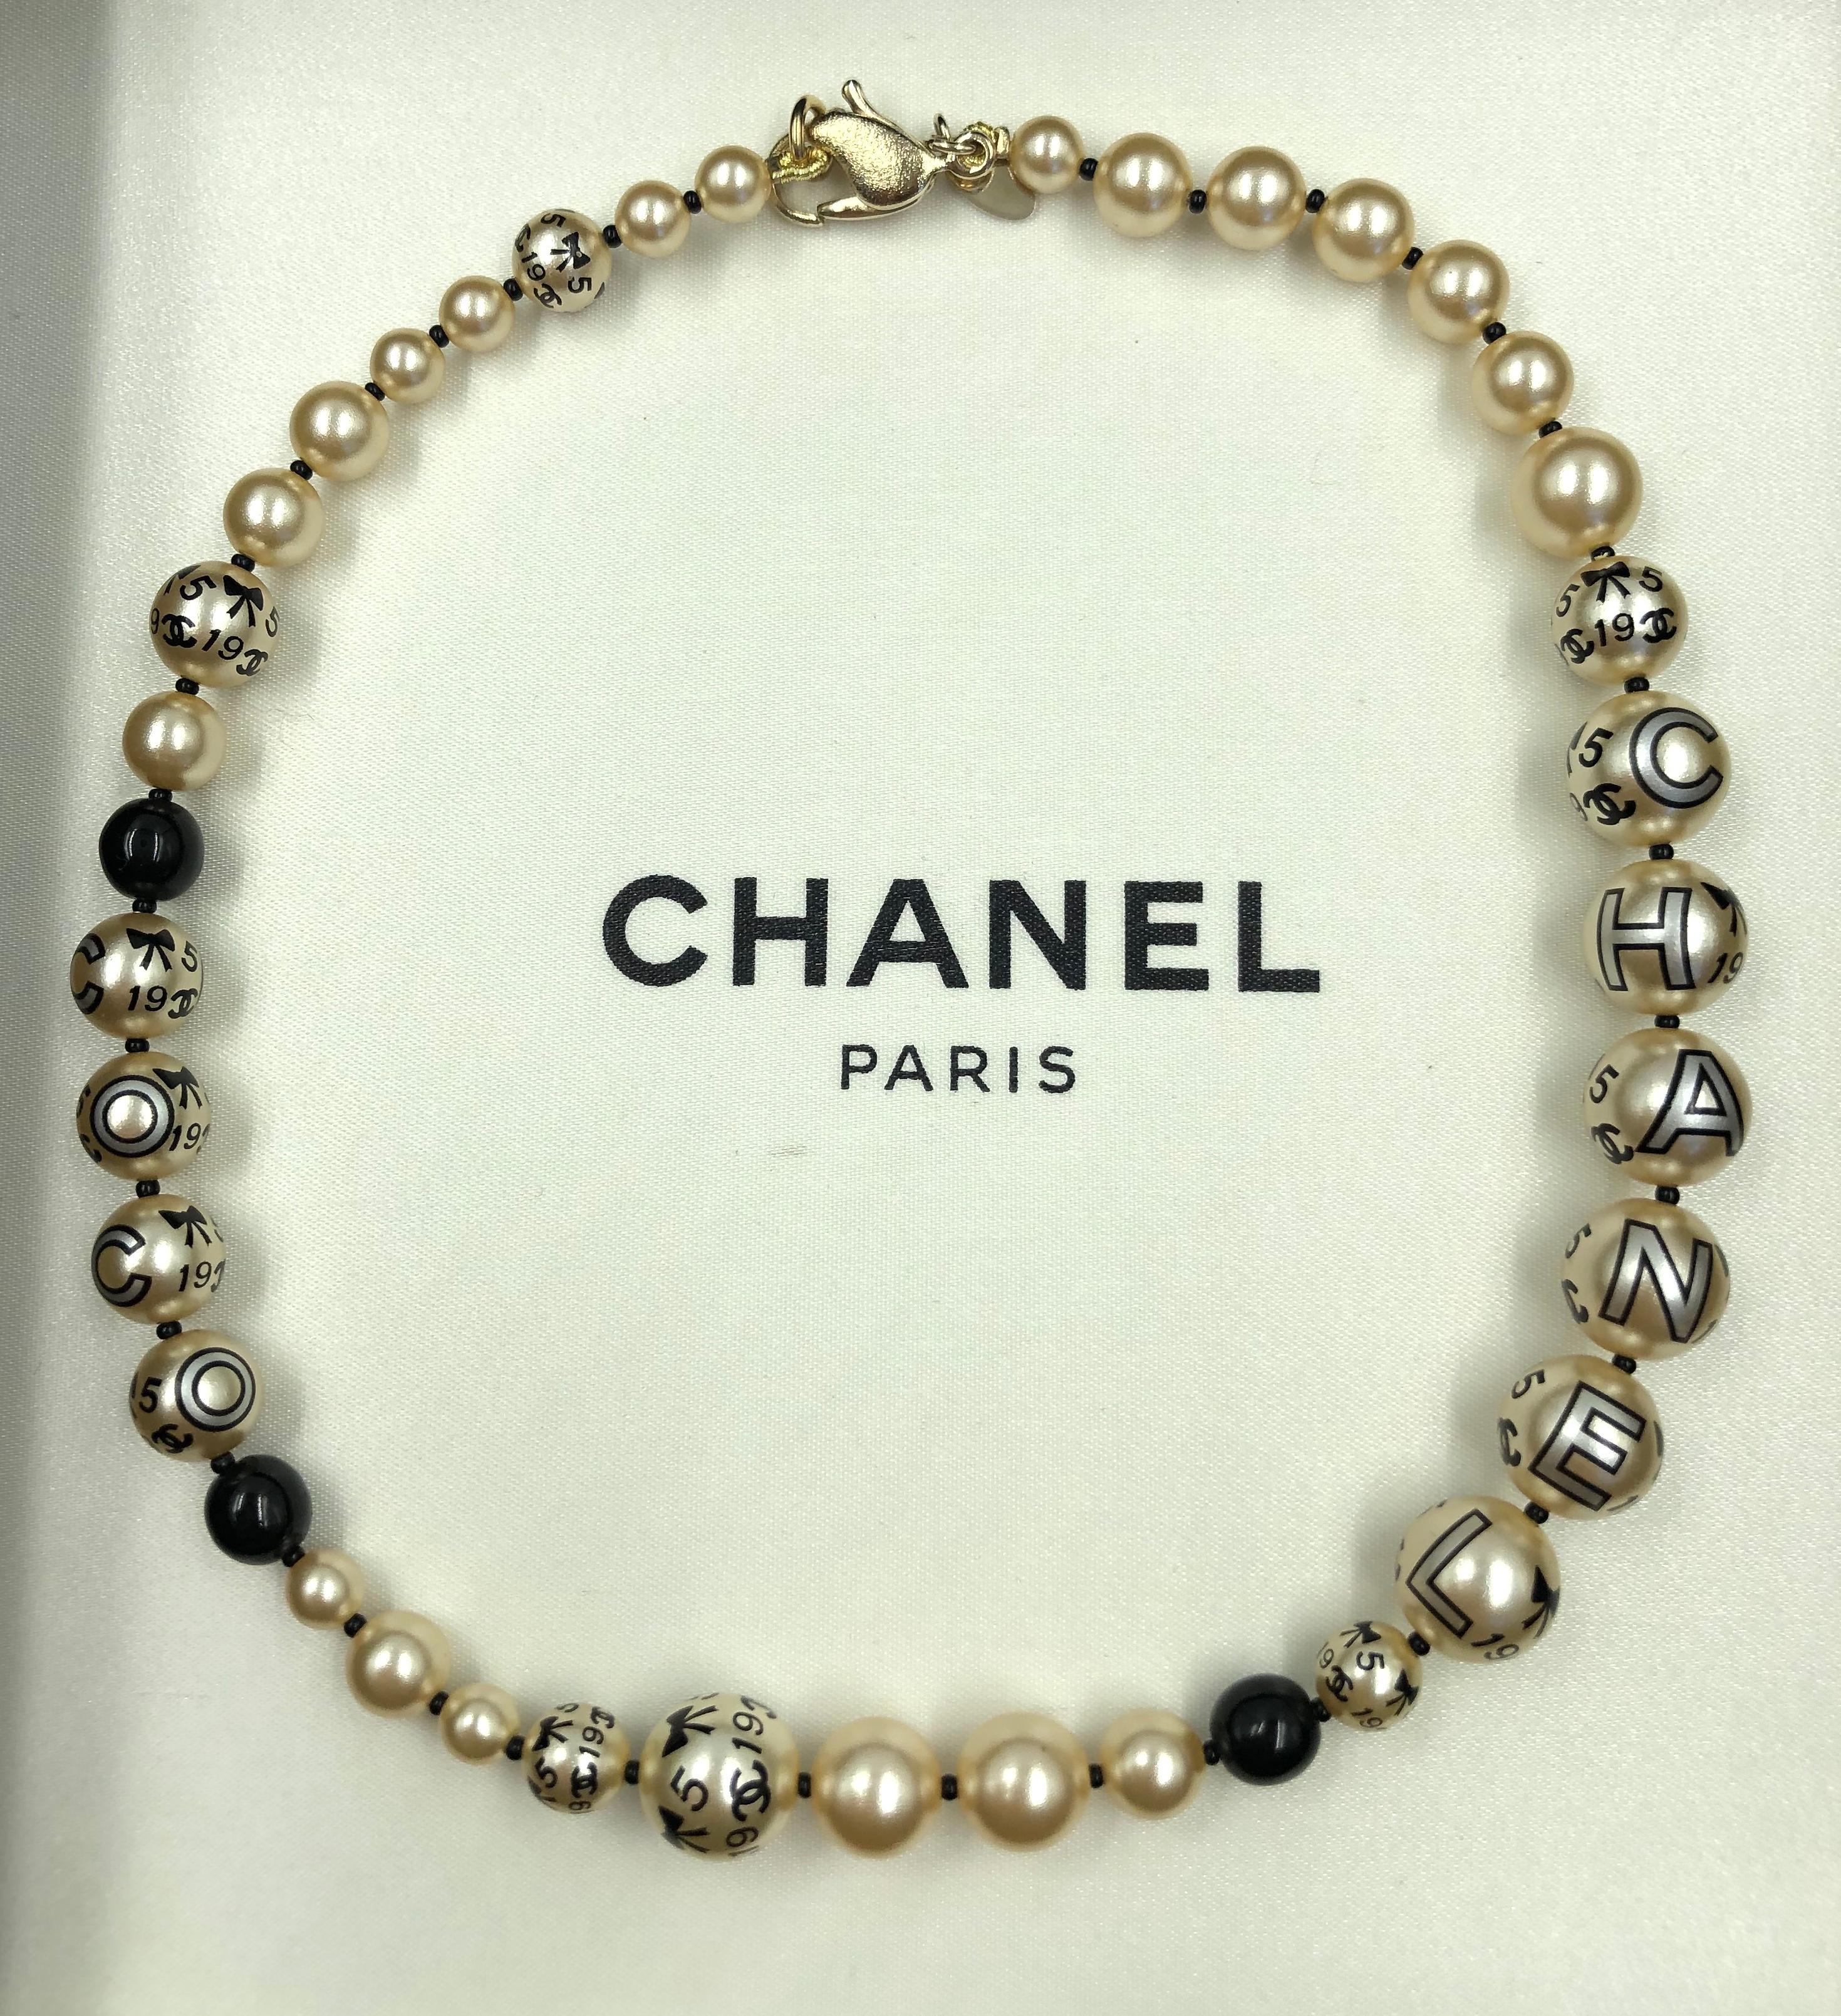 Chanel 1990's Faux pearls with Coco Chanel Print on Strand
Necklace comes with original box.

Length: 15